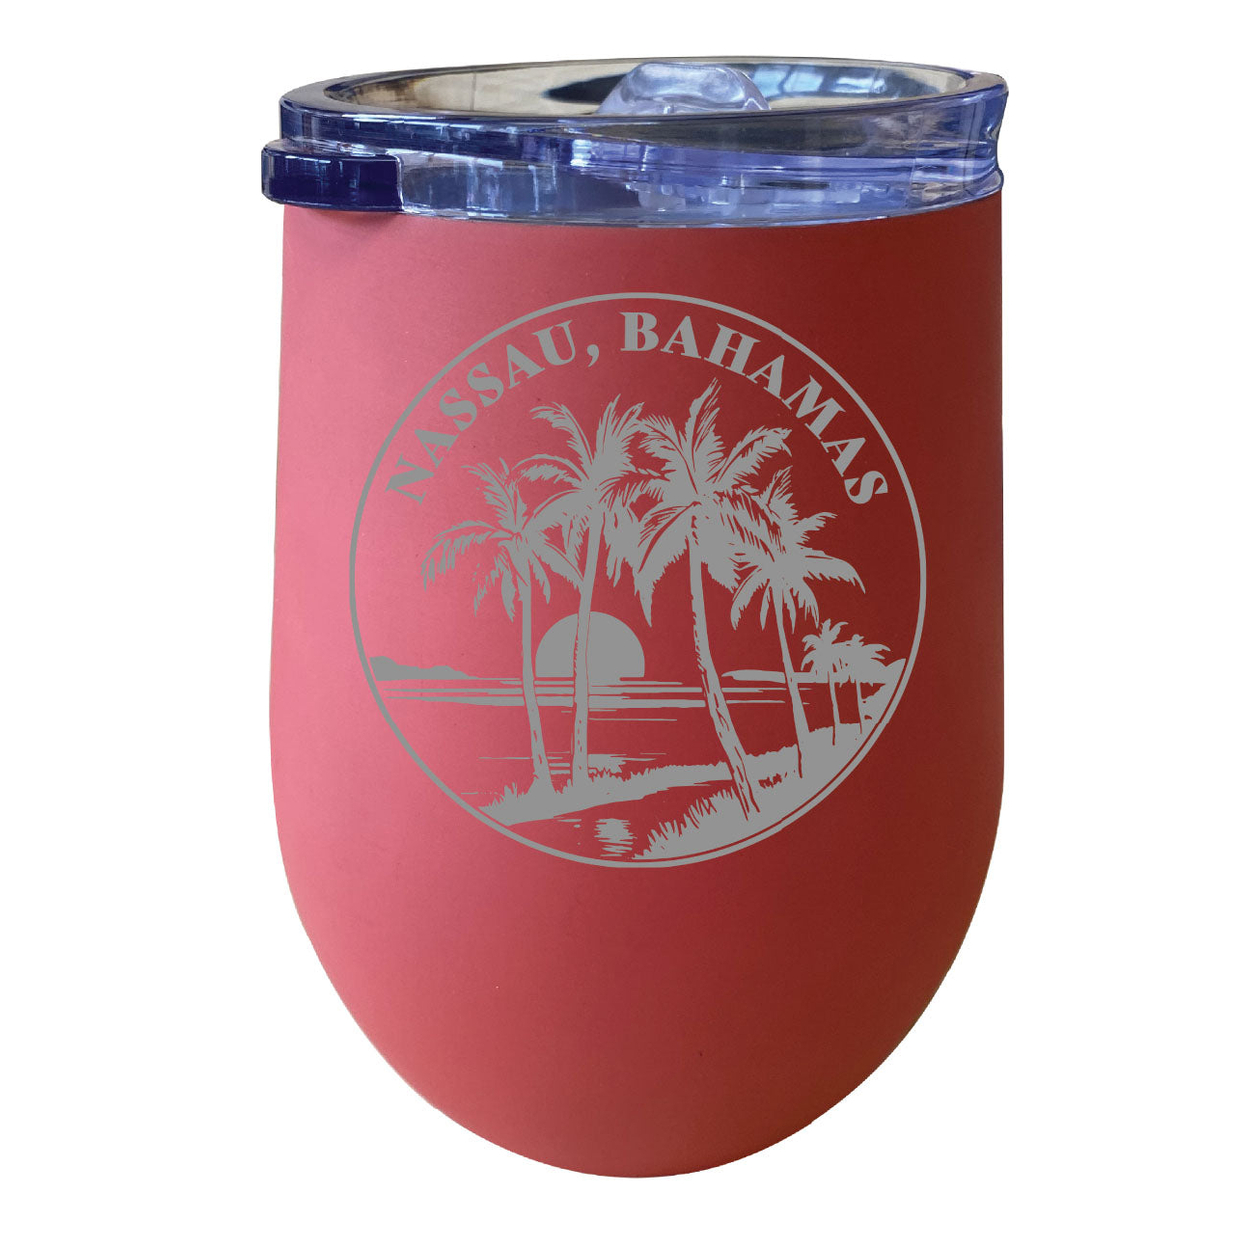 Nassau The Bahamas Souvenir 12 Oz Engraved Insulated Wine Stainless Steel Tumbler - Coral,,4-Pack